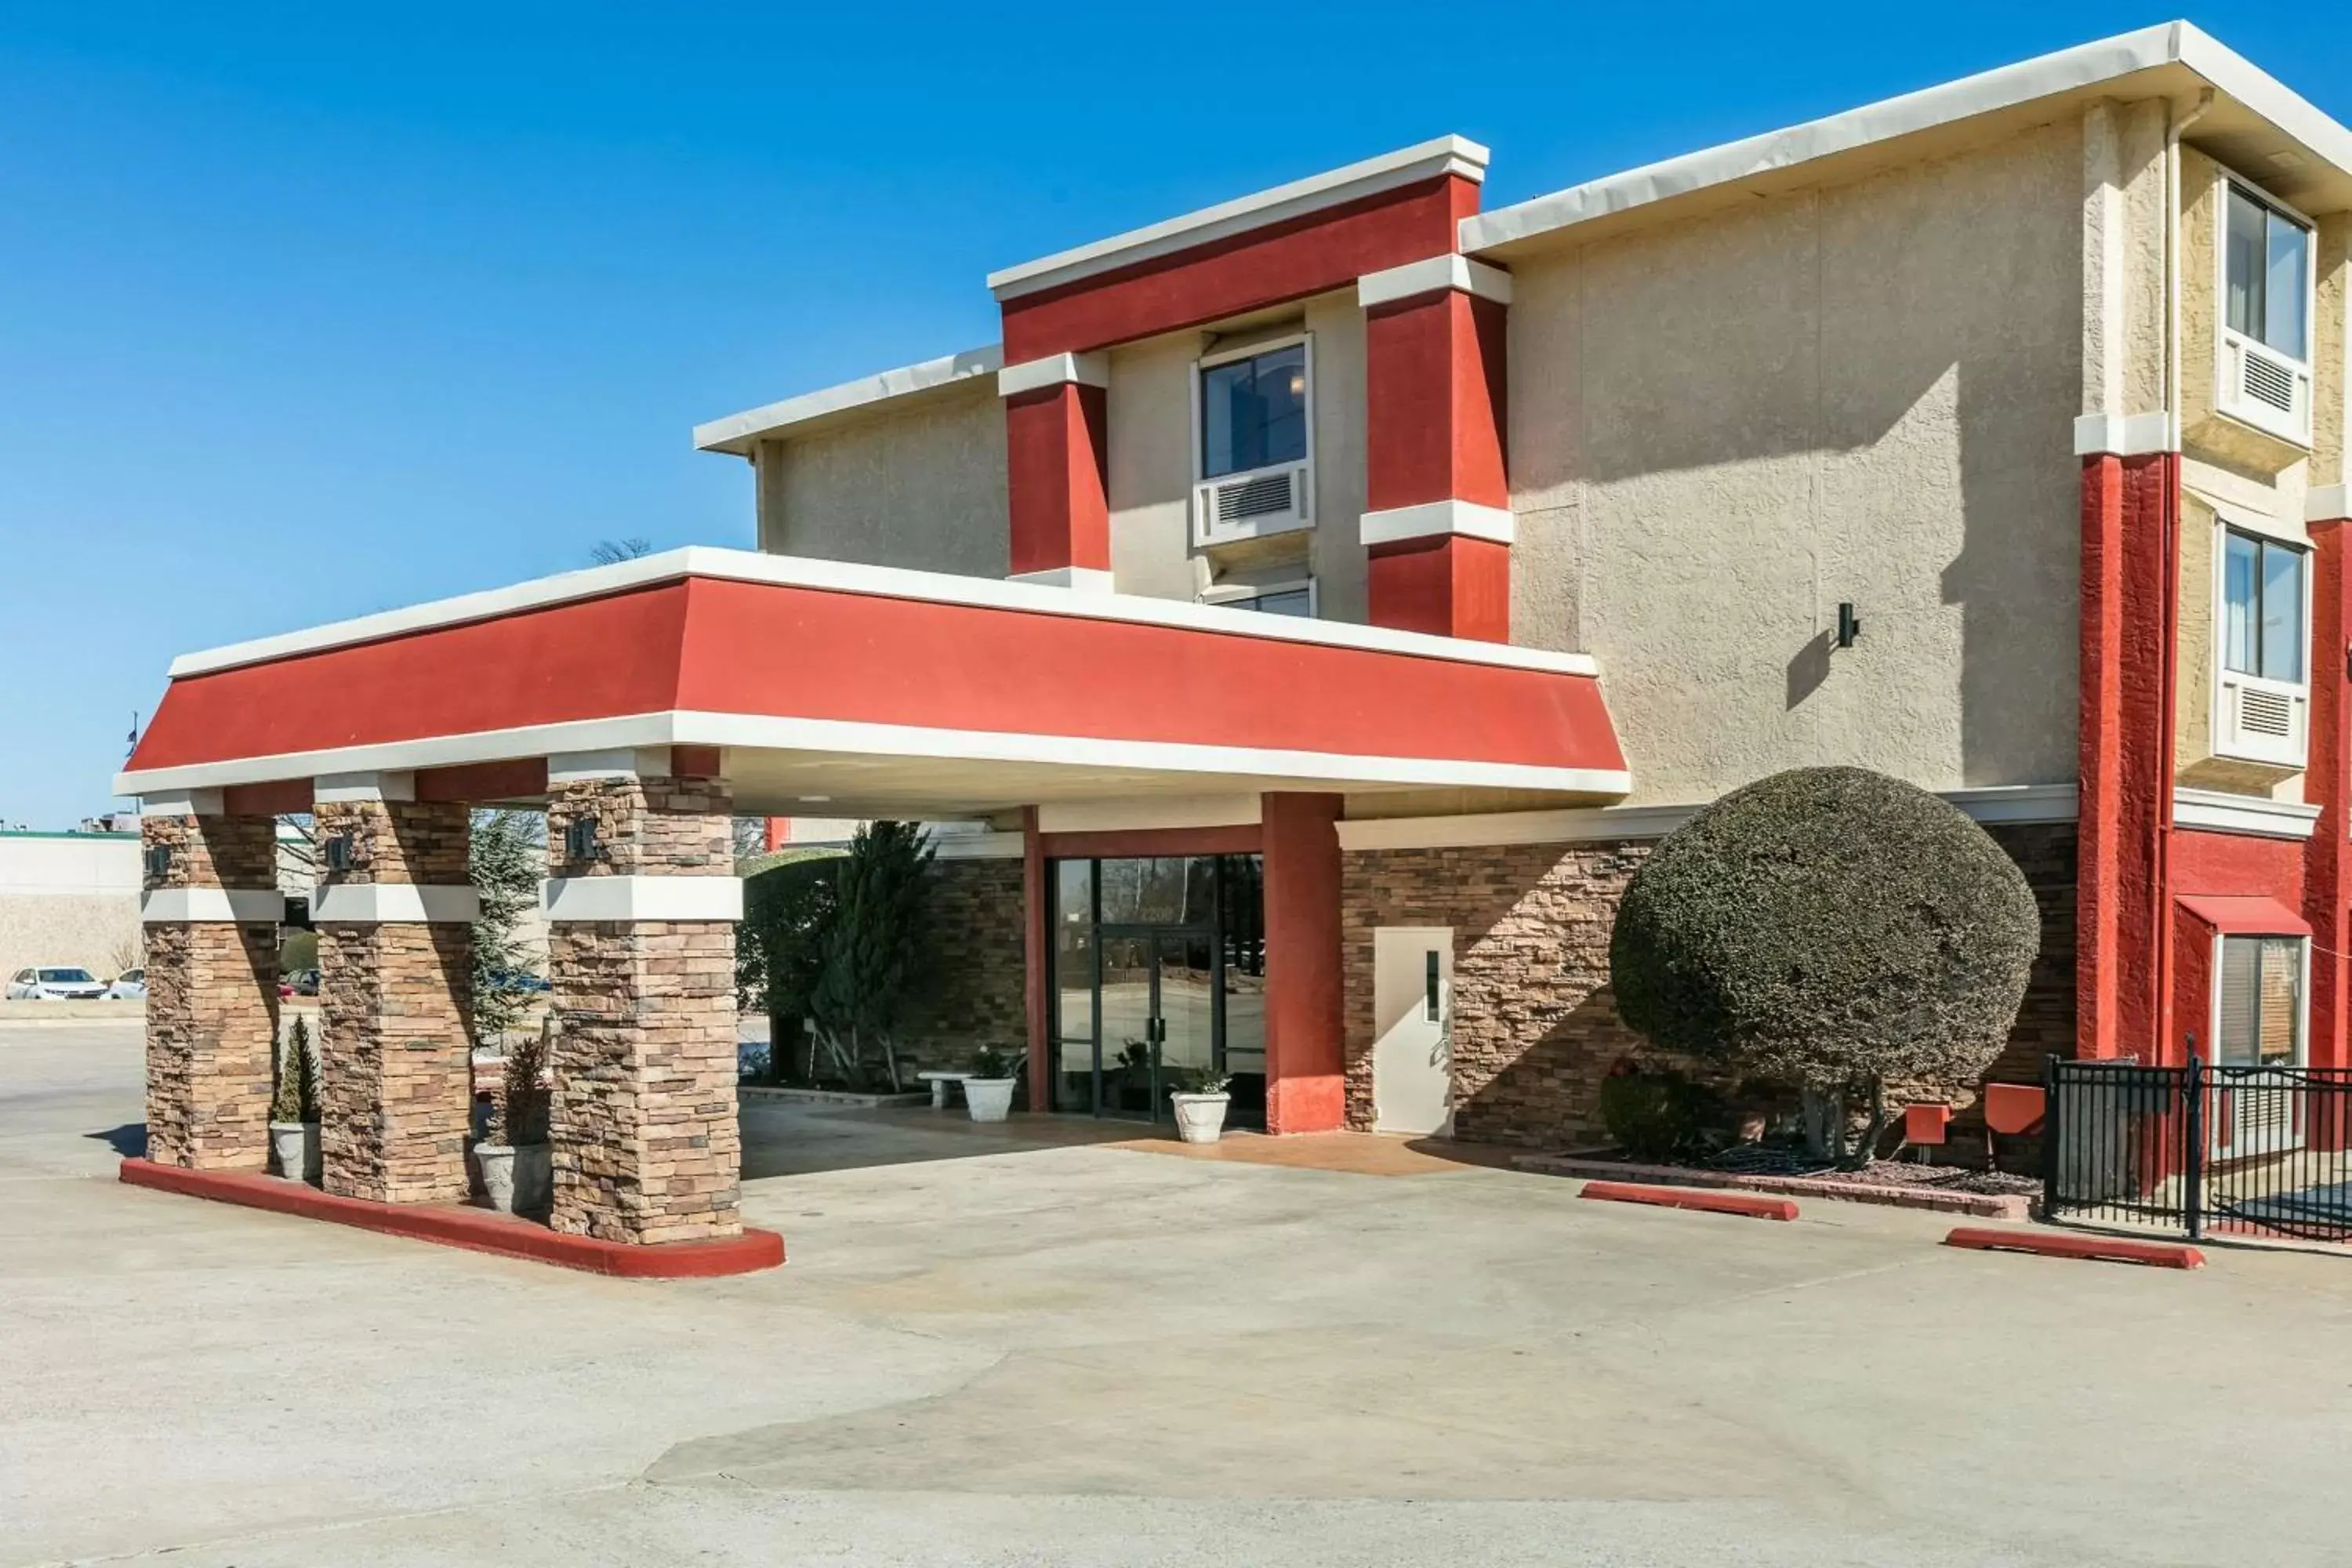 Property Building in Ramada by Wyndham Oklahoma City Airport North